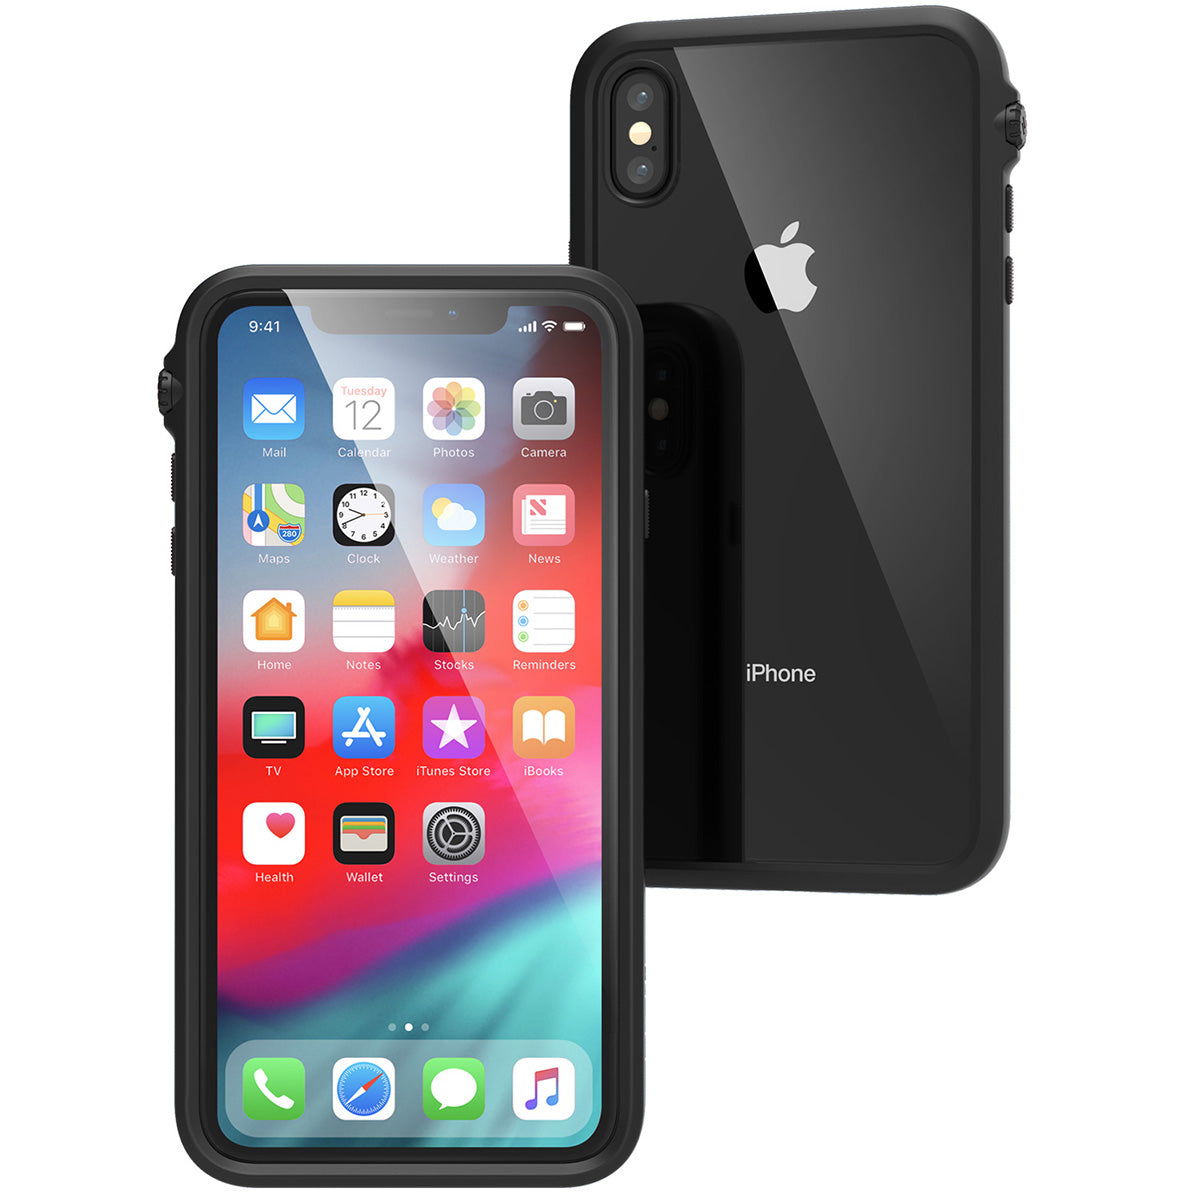 Catalyst Impact Protection Case for iPhone X/XR/Xs/Xs Max showing the front and back of the iphone with the catalyst case installed